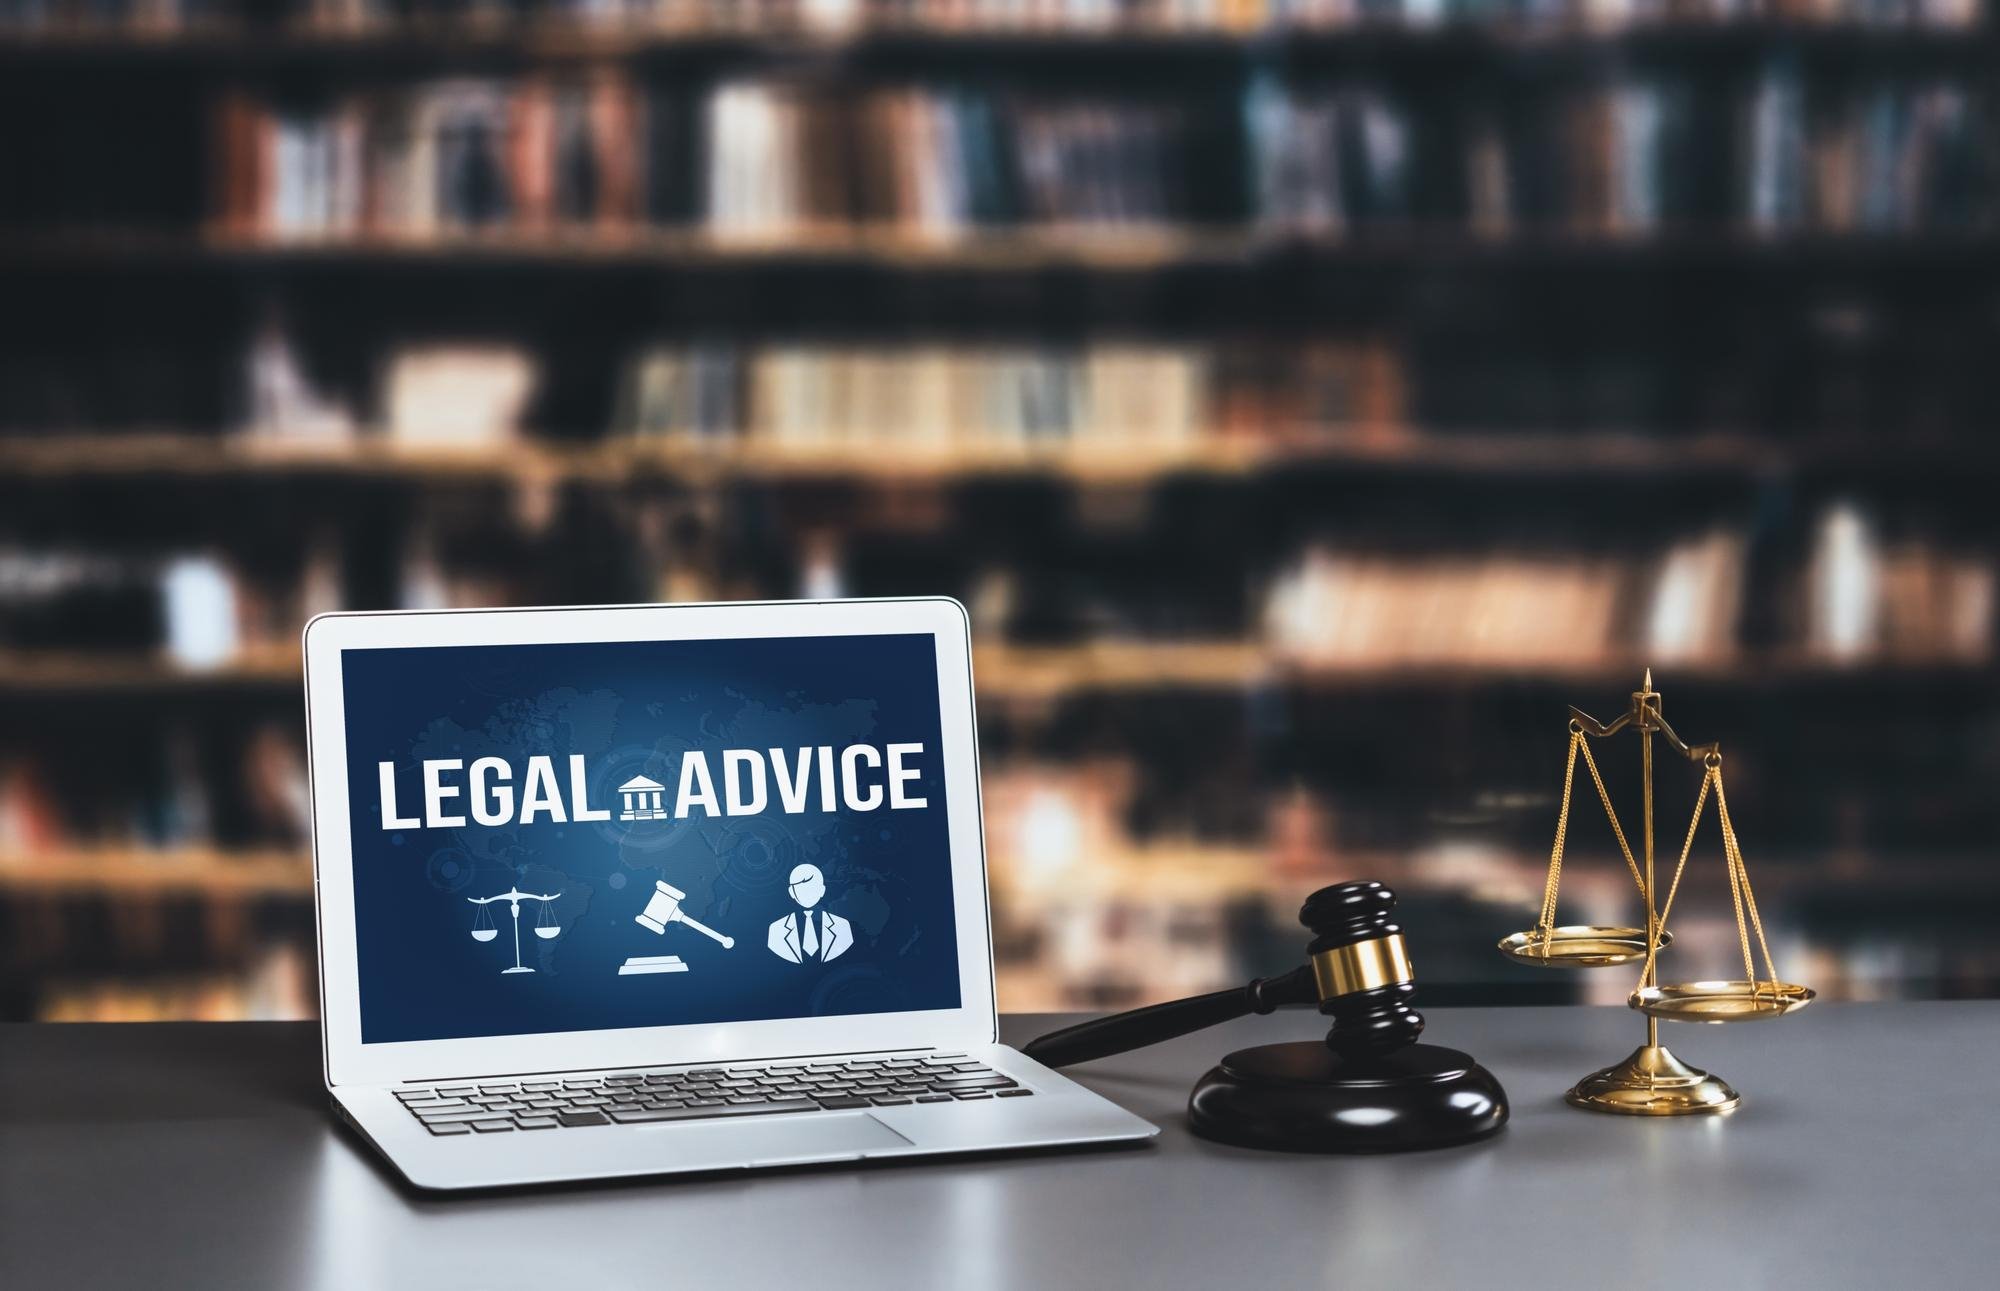 Smart legal advice website people searching astute law knowledge